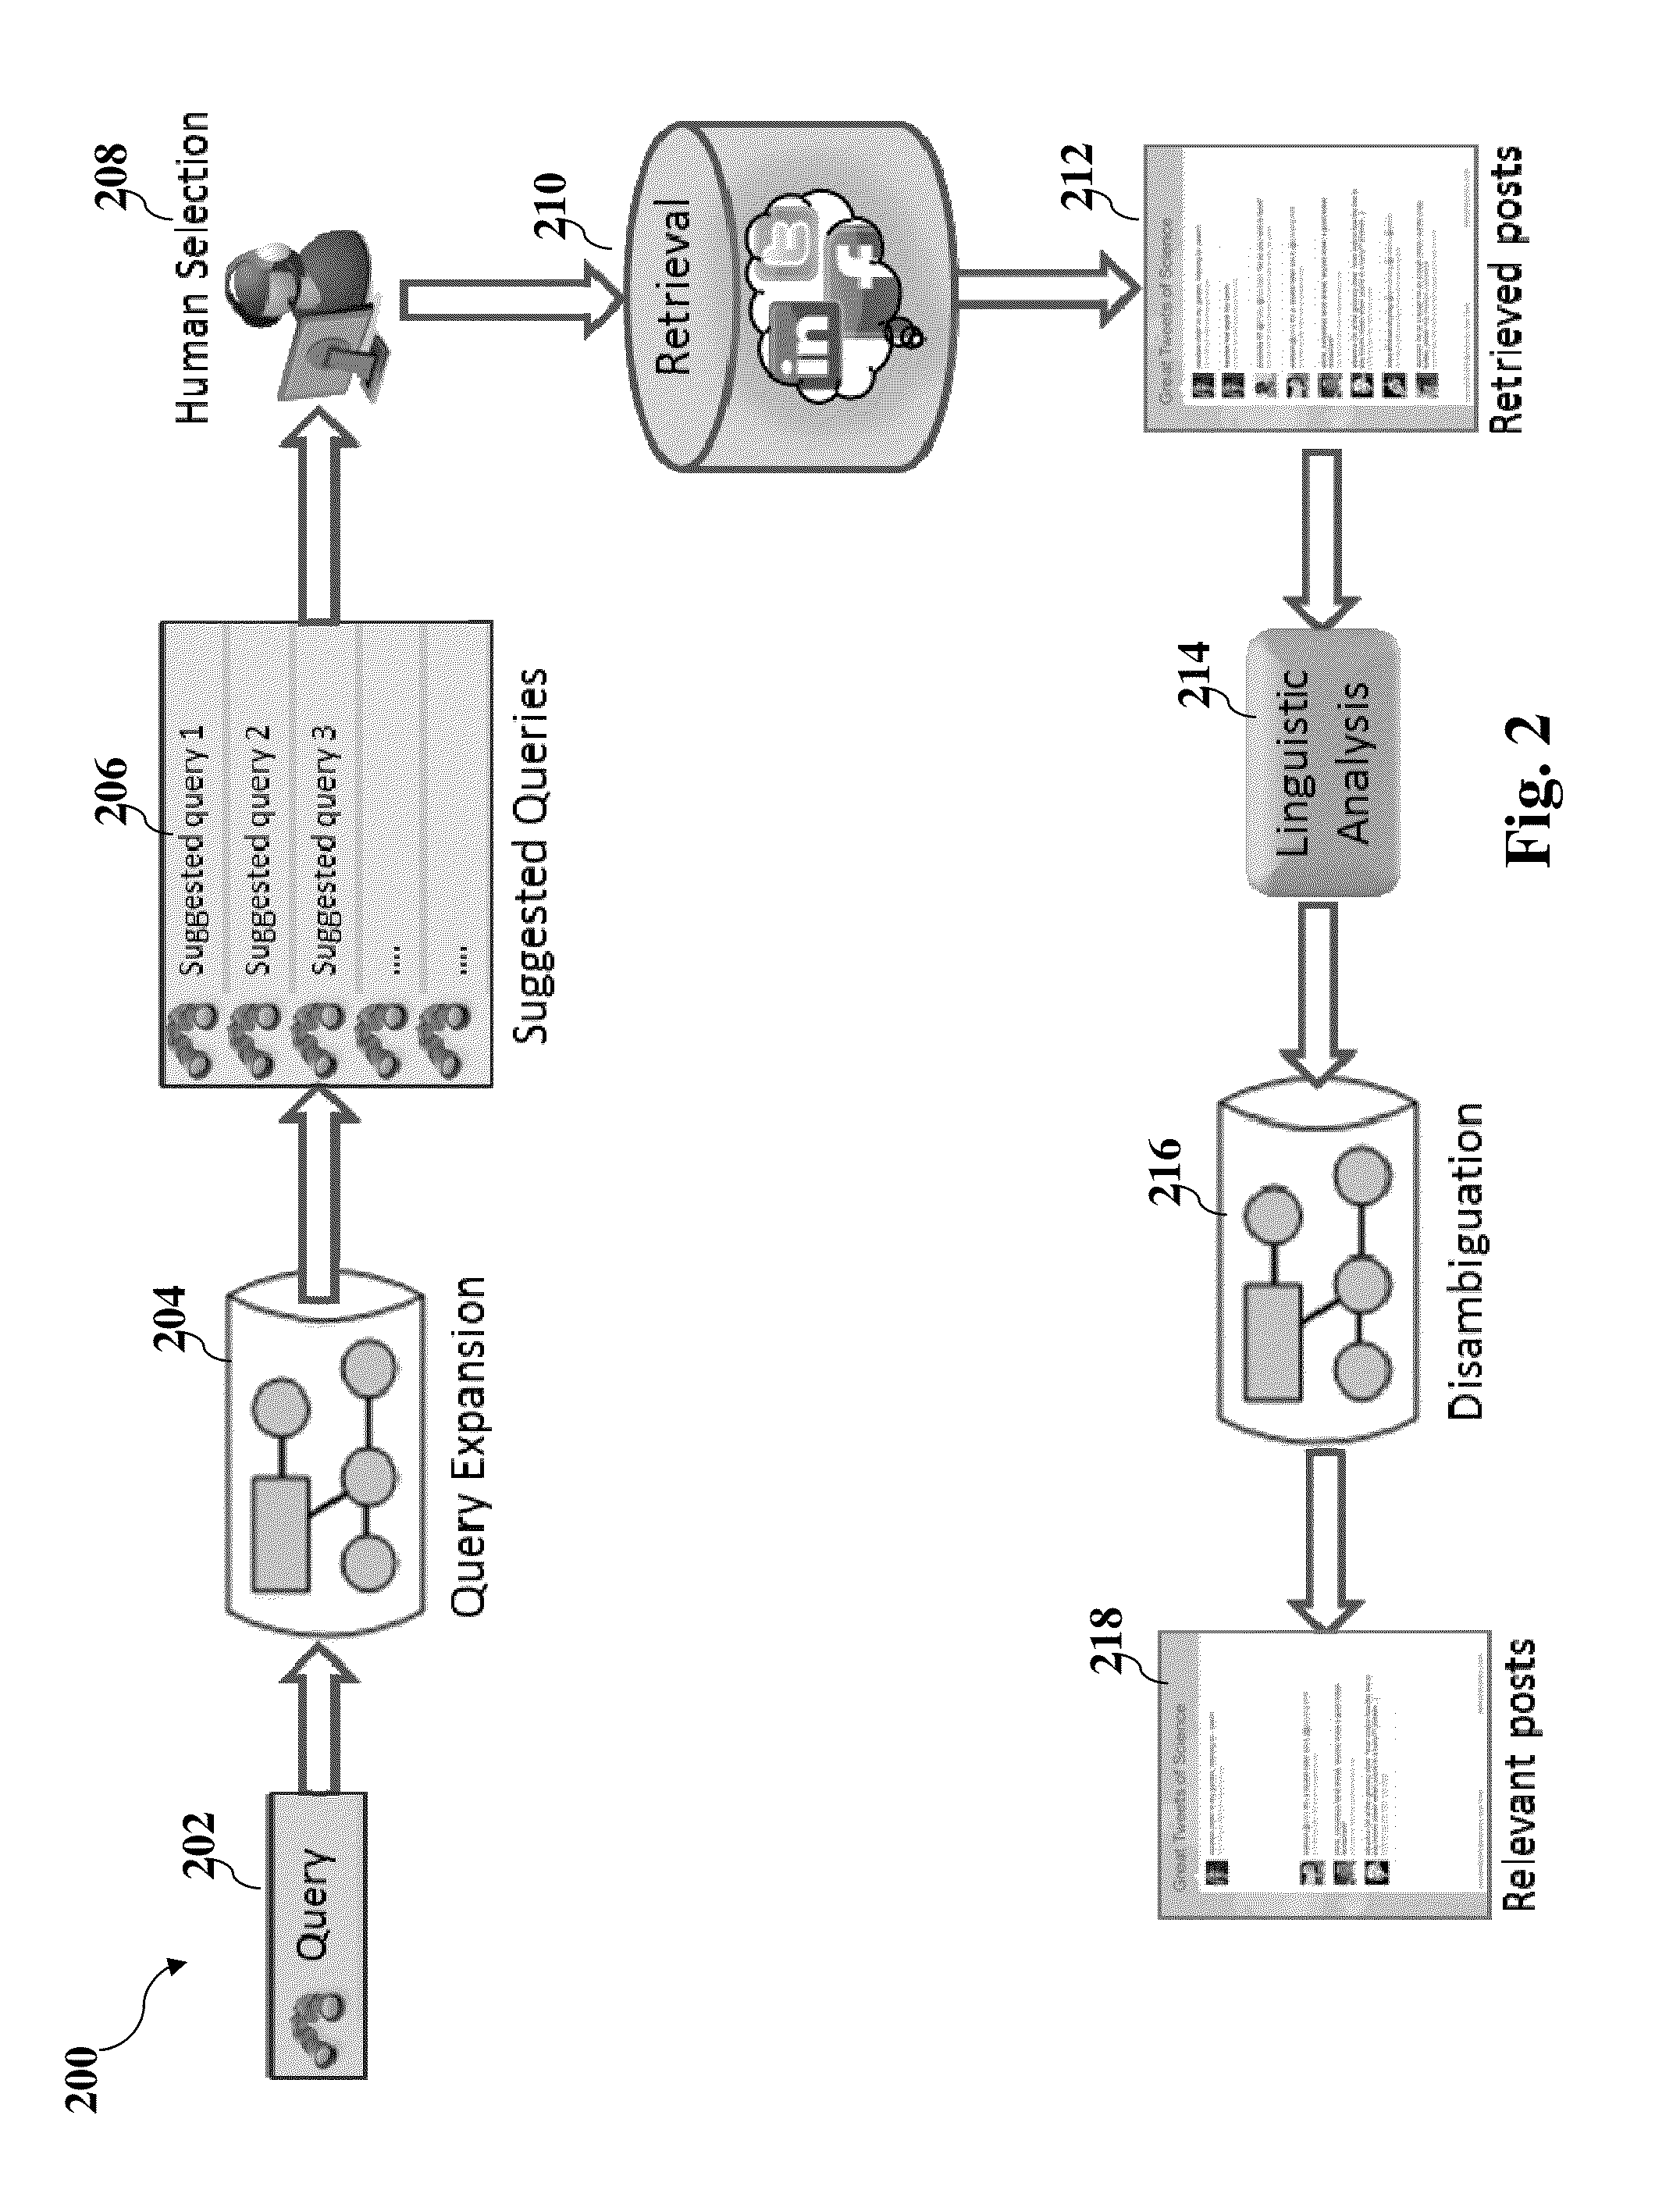 System and method for identifying social media interactions